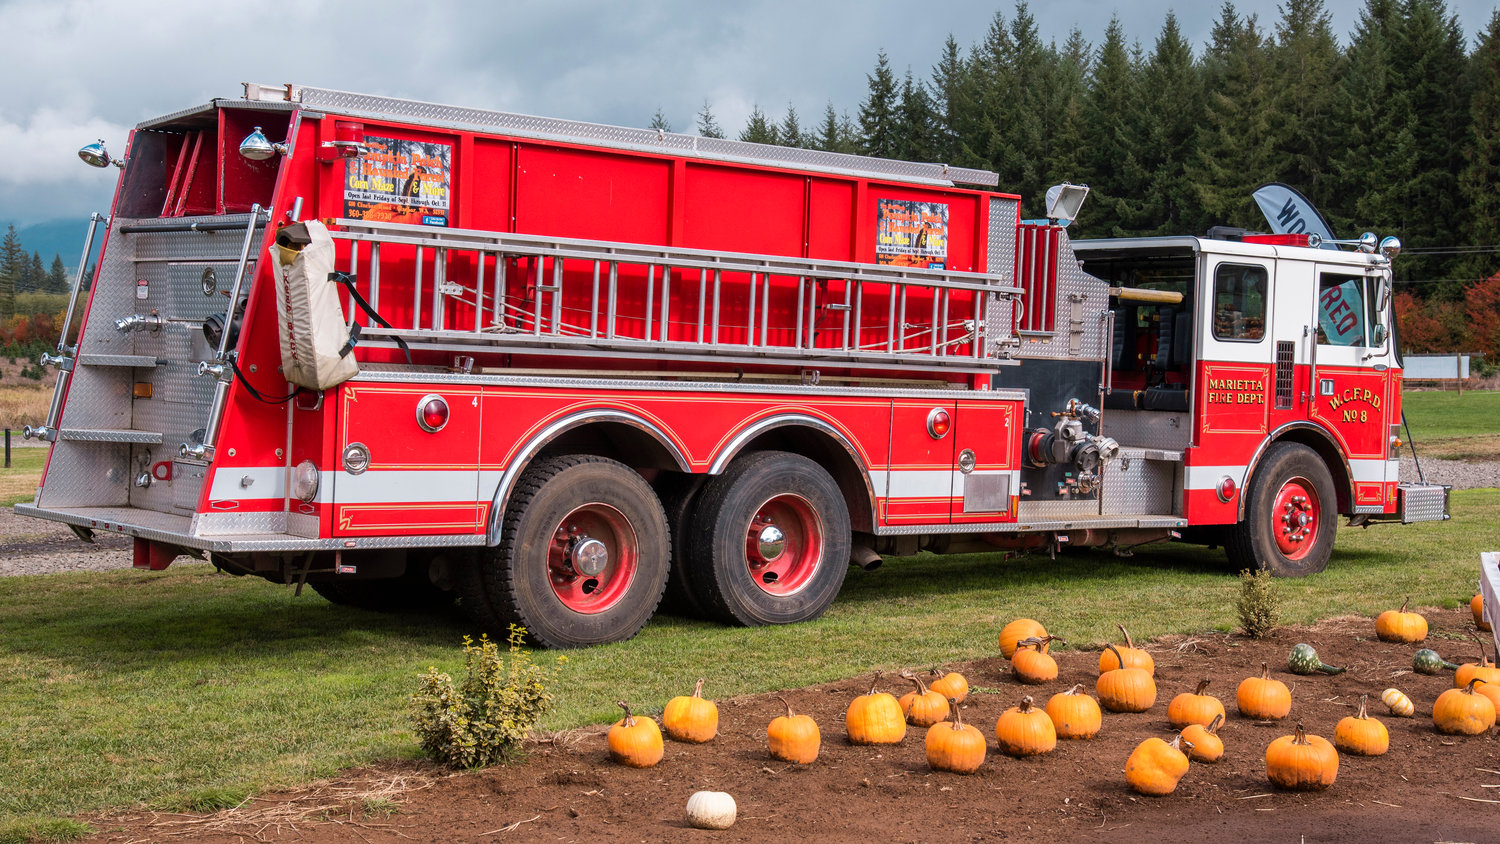 A ladder truck sits on display at Huntting’s Pumpkin Patch in Cinebar on Wednesday.